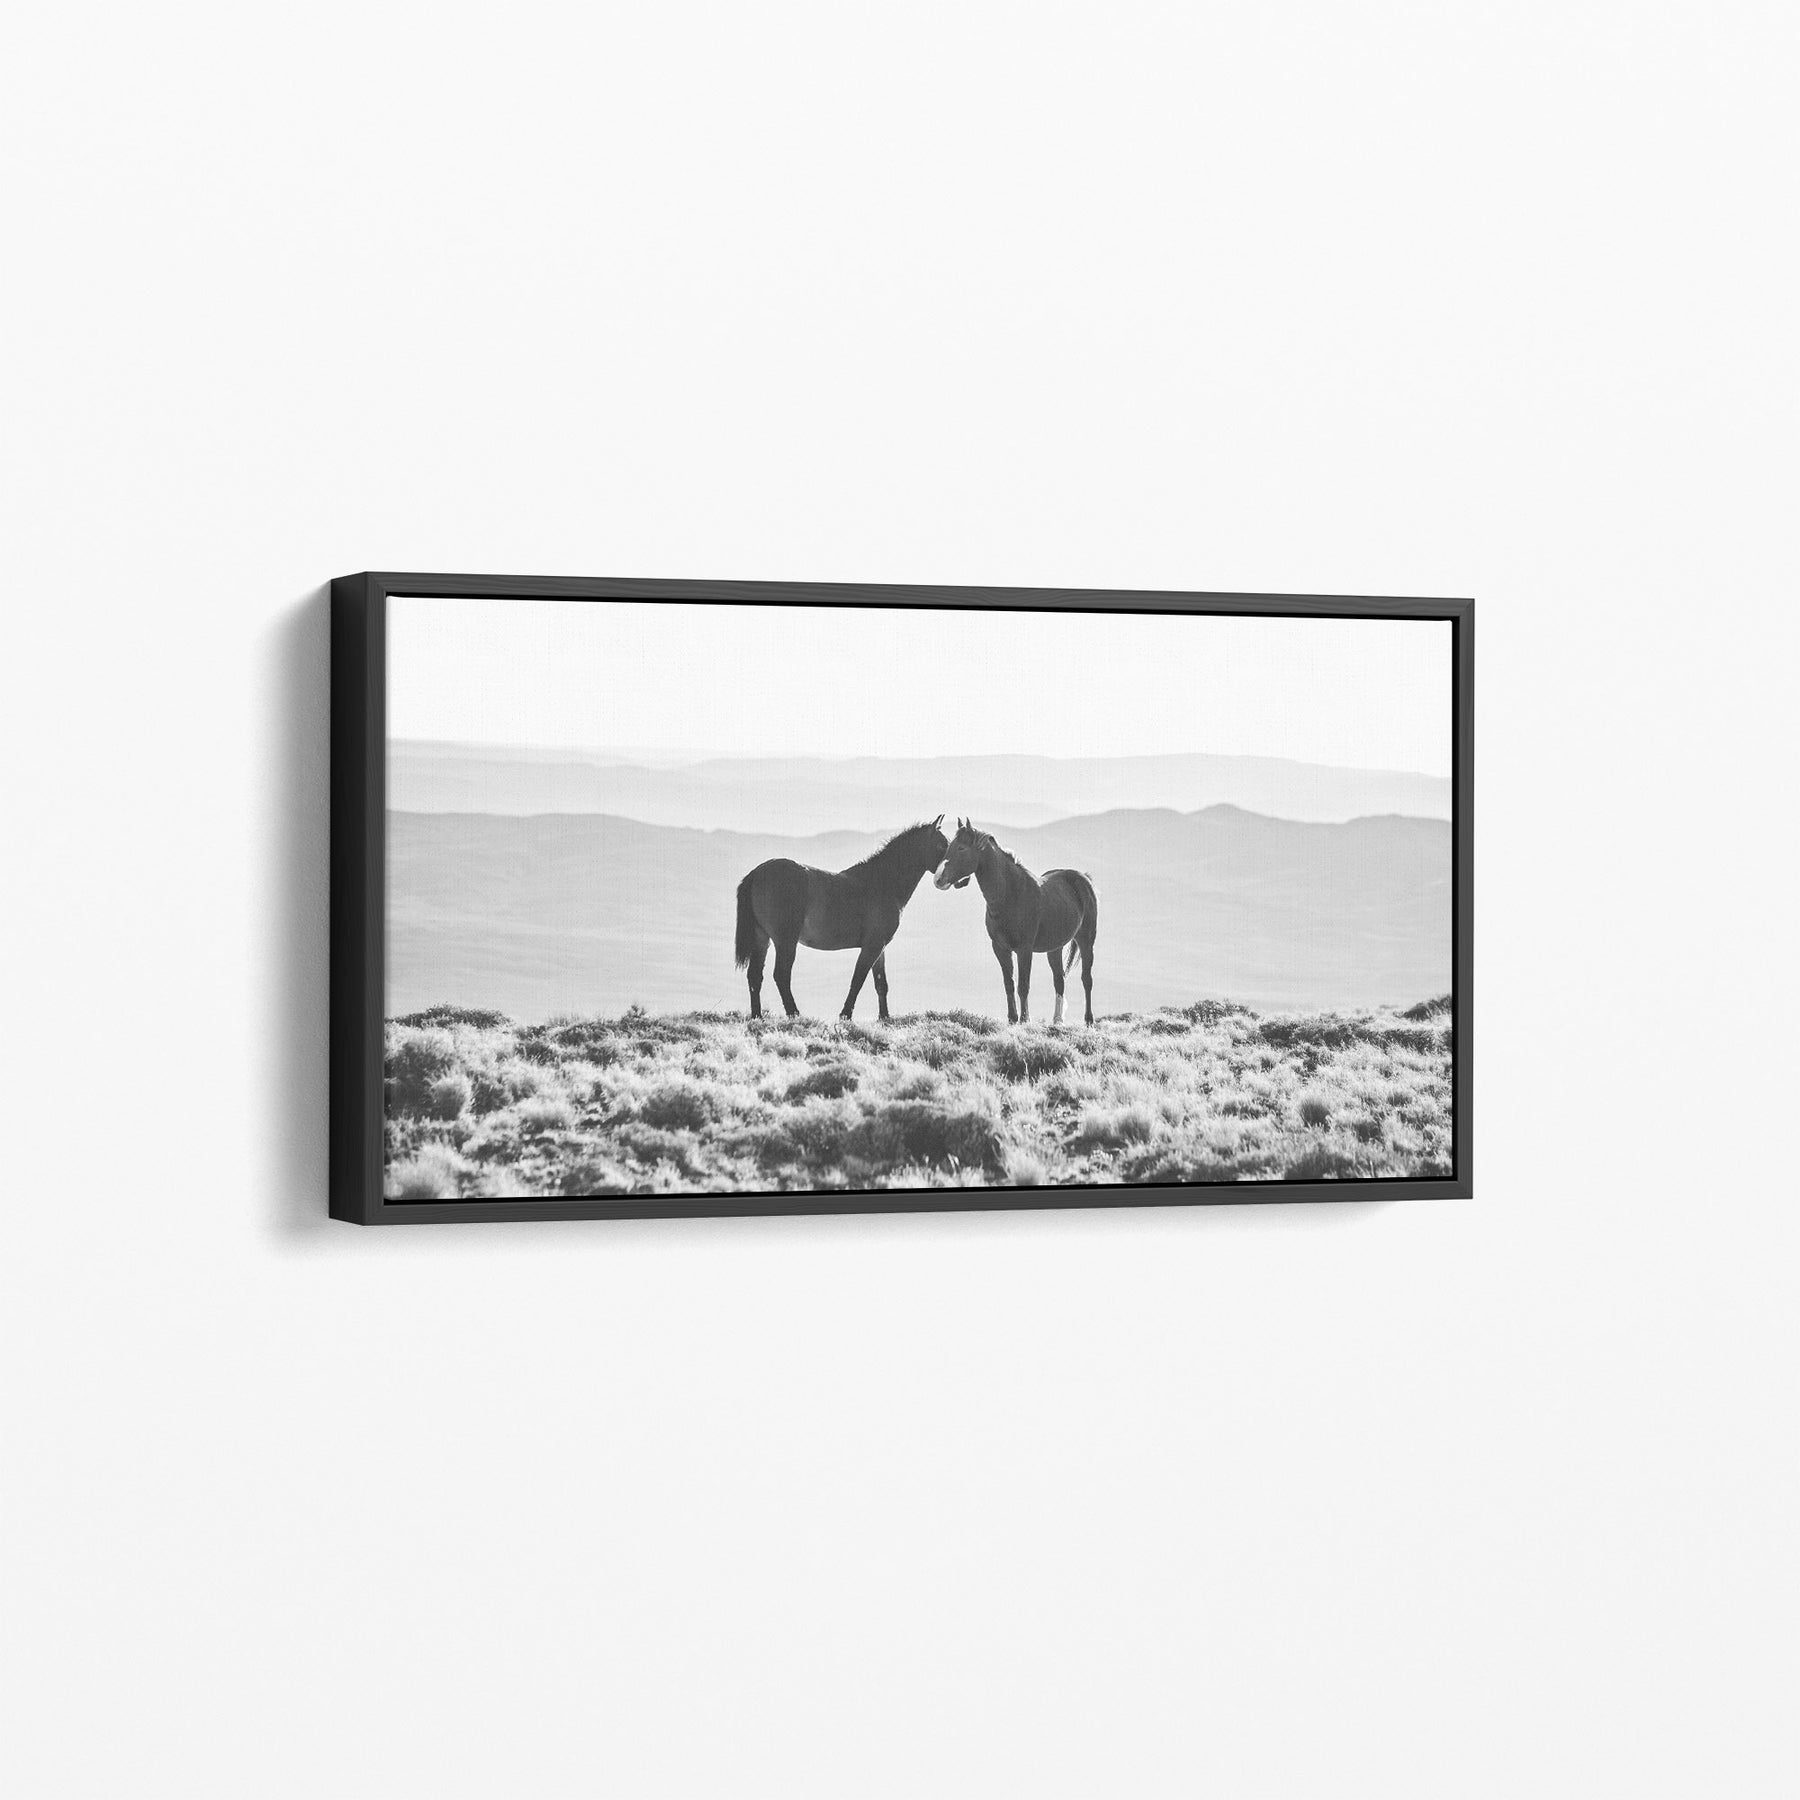 Wild Horse Embrace, 60x25 Canvas Gallery Wrap, In Black Wood Float Frame